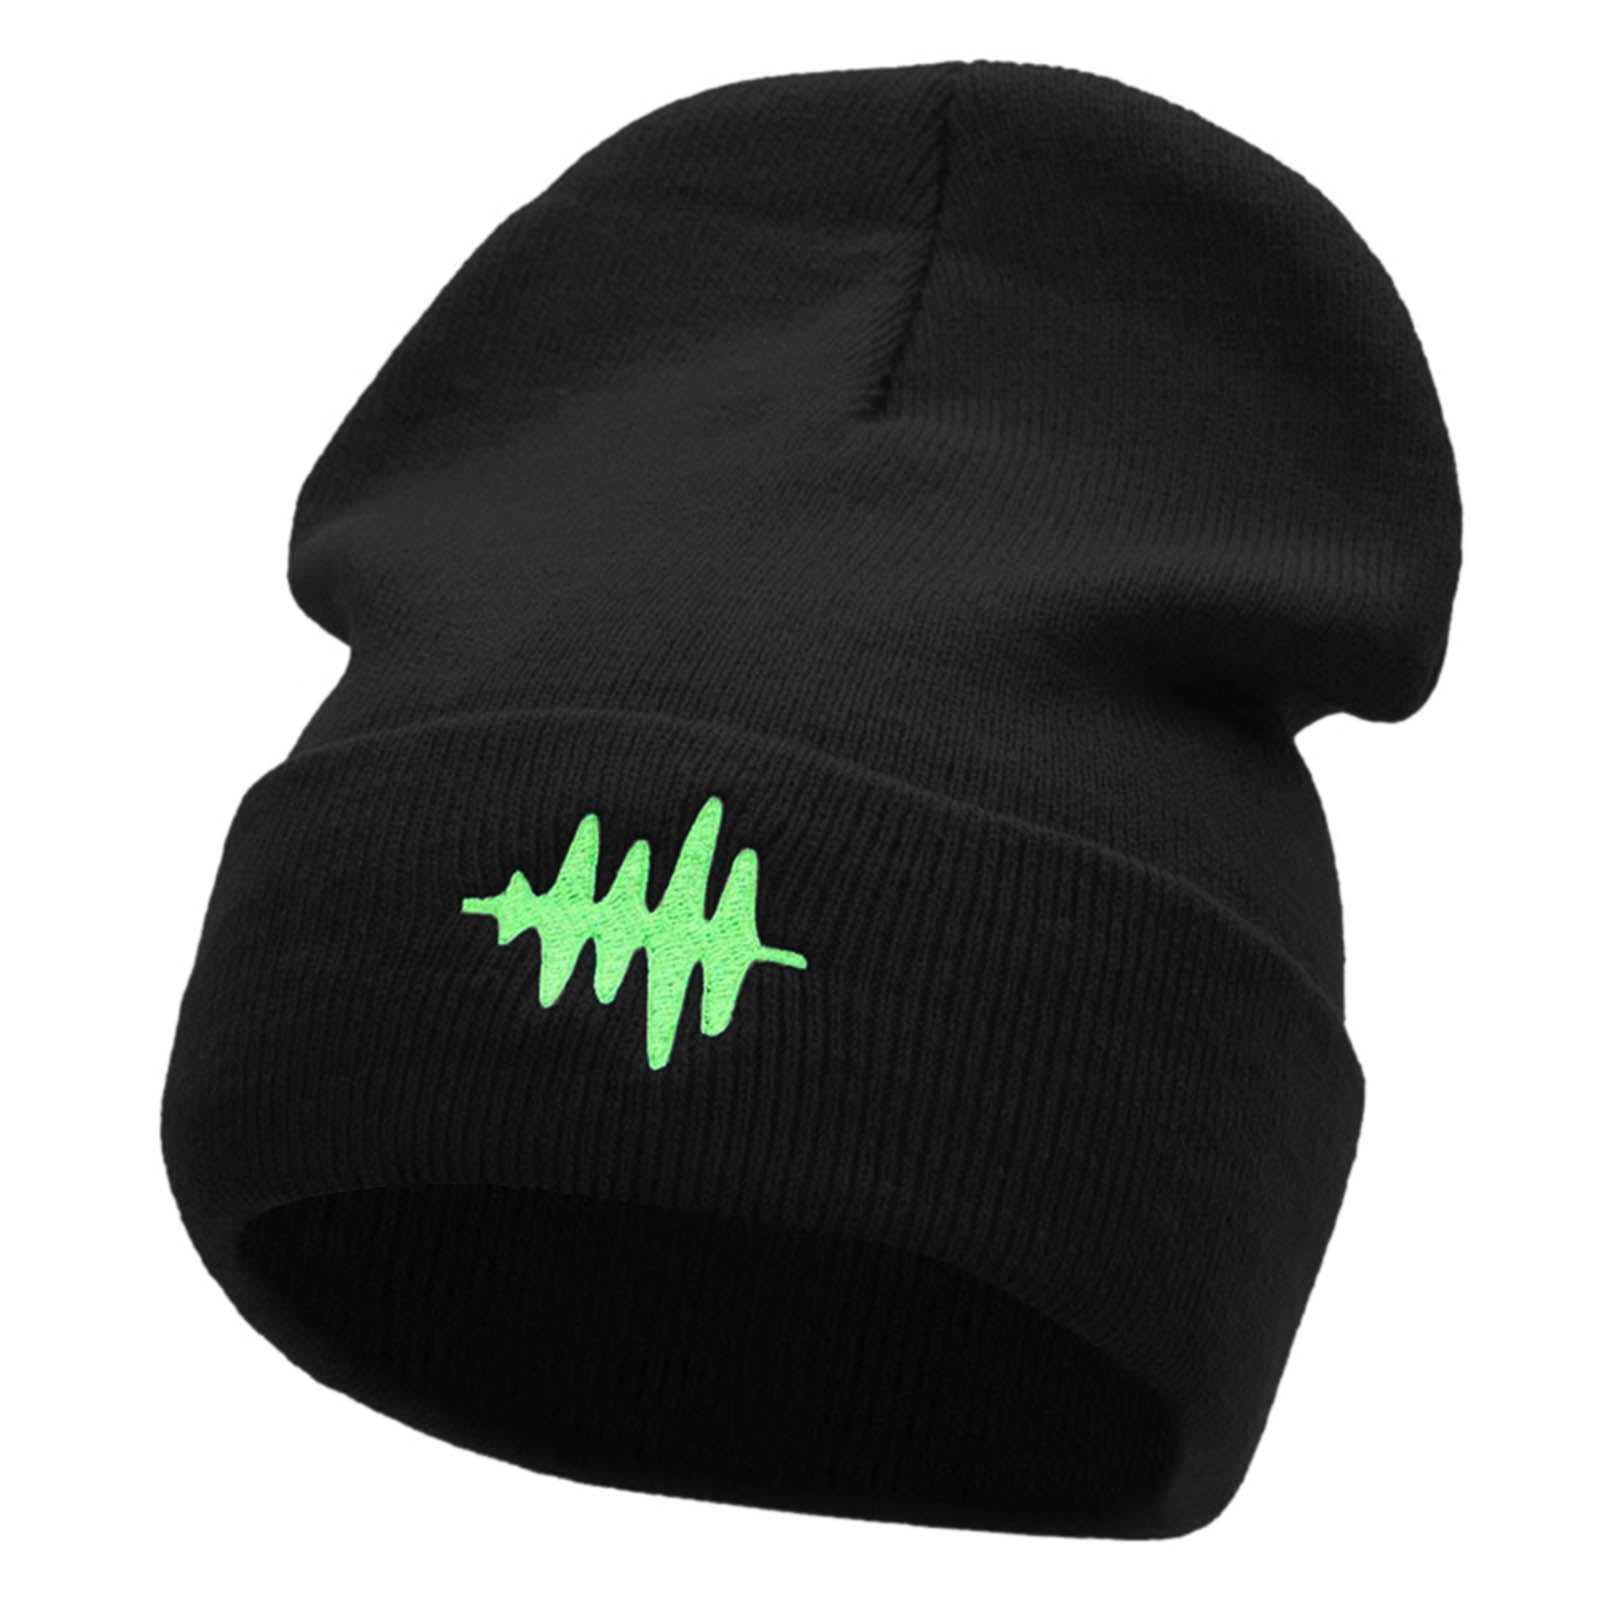 Sound Wave Embroidered 12 Inch Long Knitted Beanie - Black OSFM